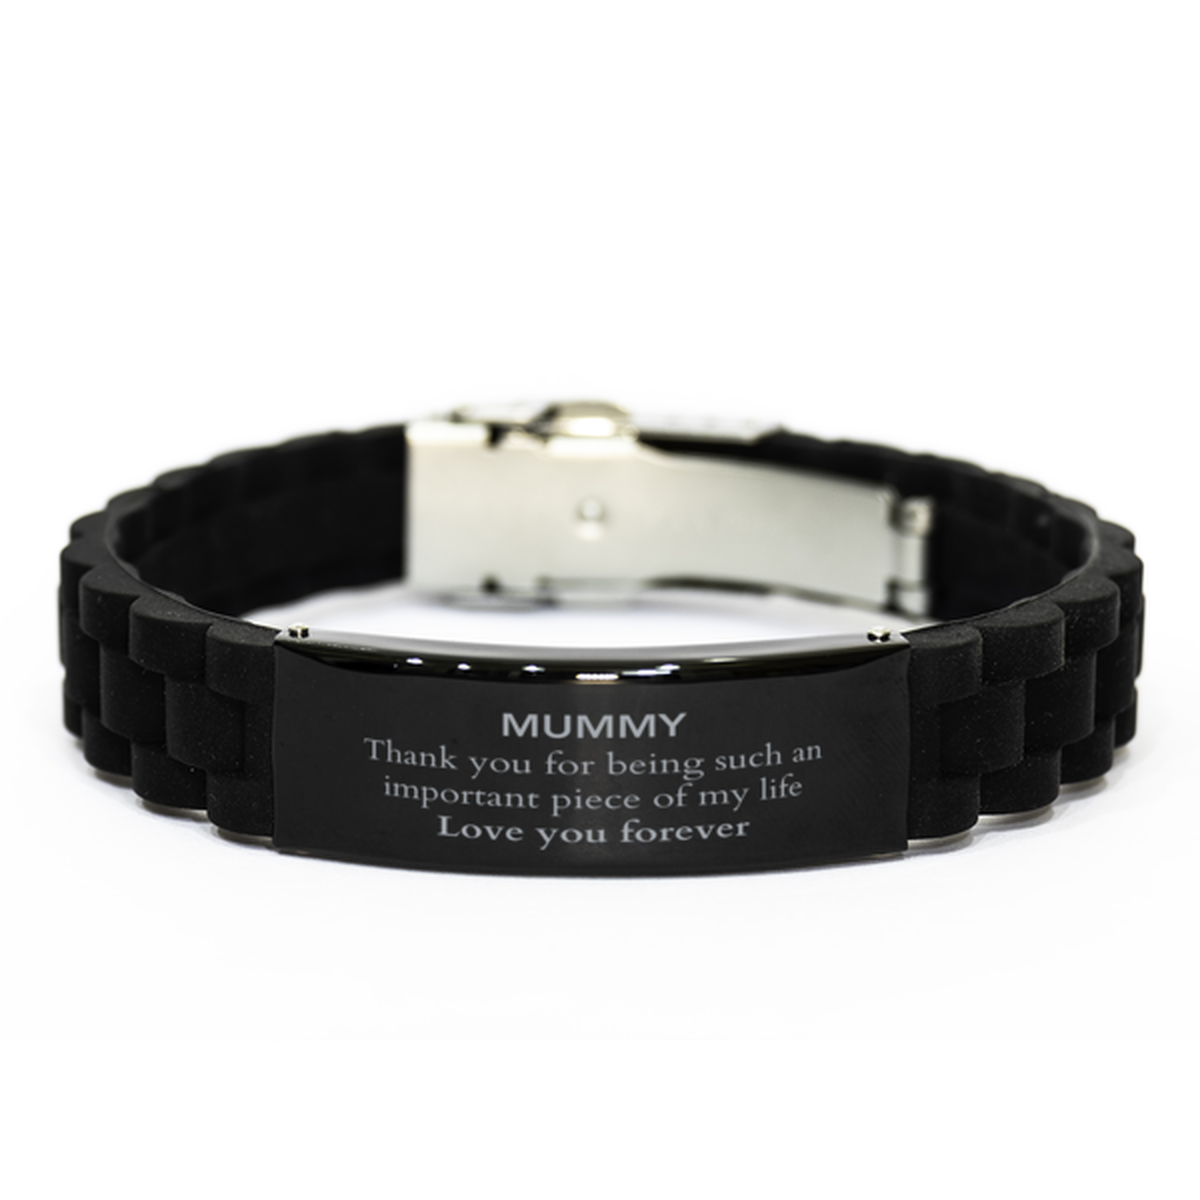 Appropriate Mummy Black Glidelock Clasp Bracelet Epic Birthday Gifts for Mummy Thank you for being such an important piece of my life Mummy Christmas Mothers Fathers Day